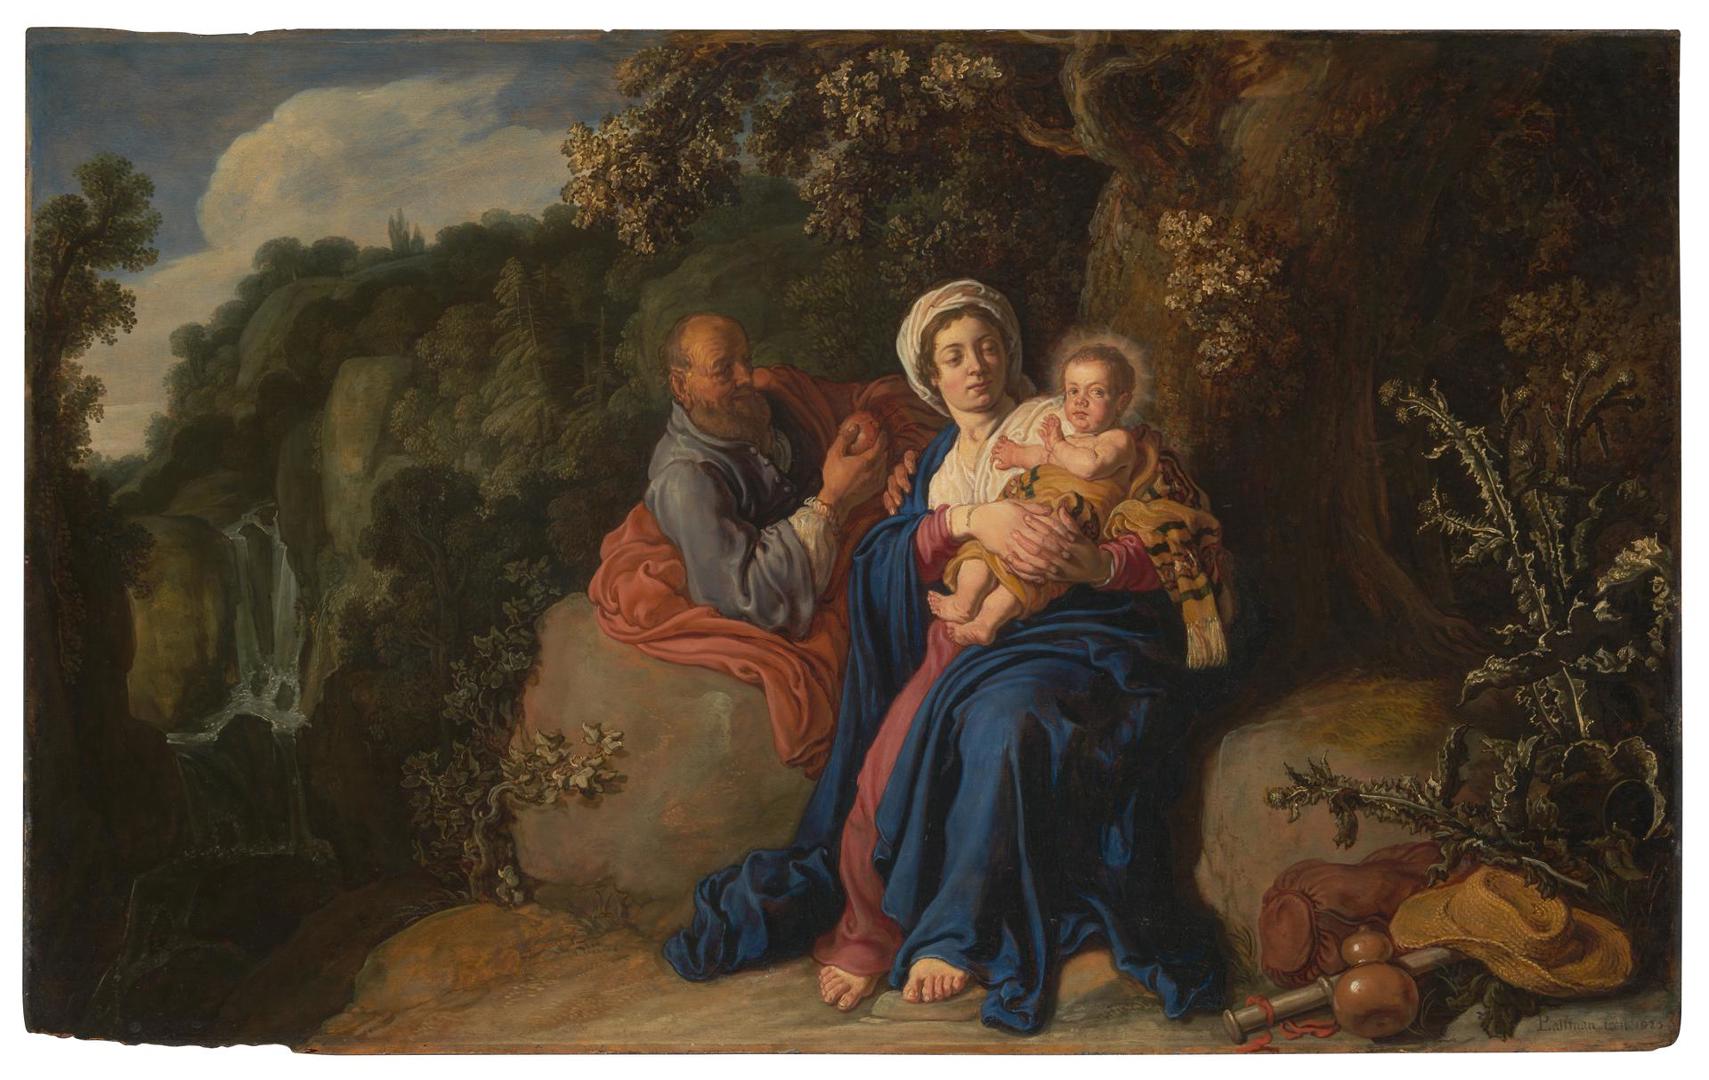 The Rest on the Flight into Egypt by Pieter Lastman